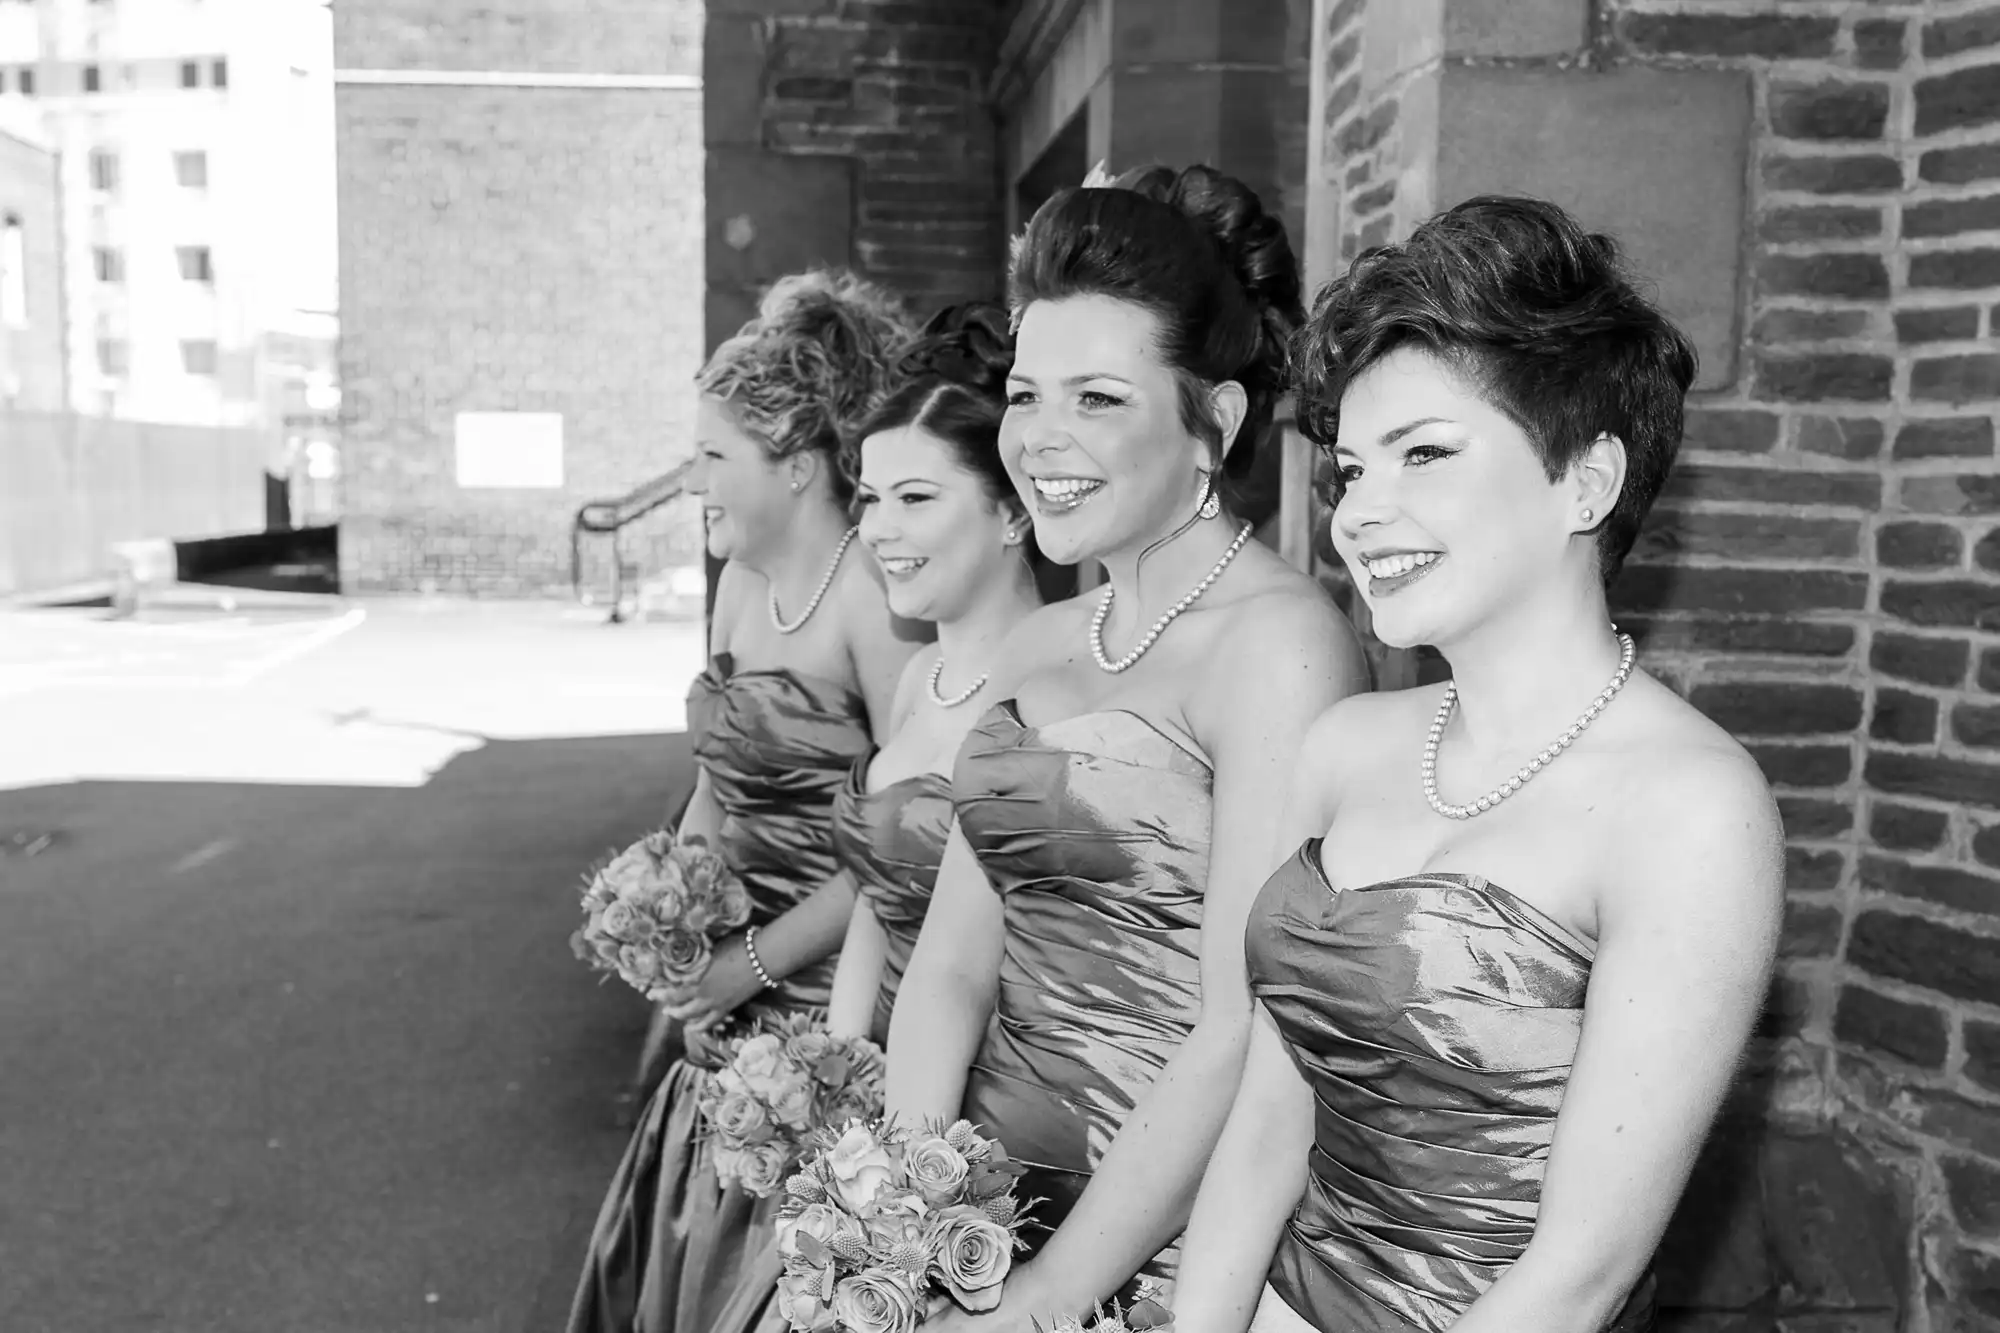 Four women in elegant dresses and pearl necklaces smiling outdoors at a wedding, black and white photo.